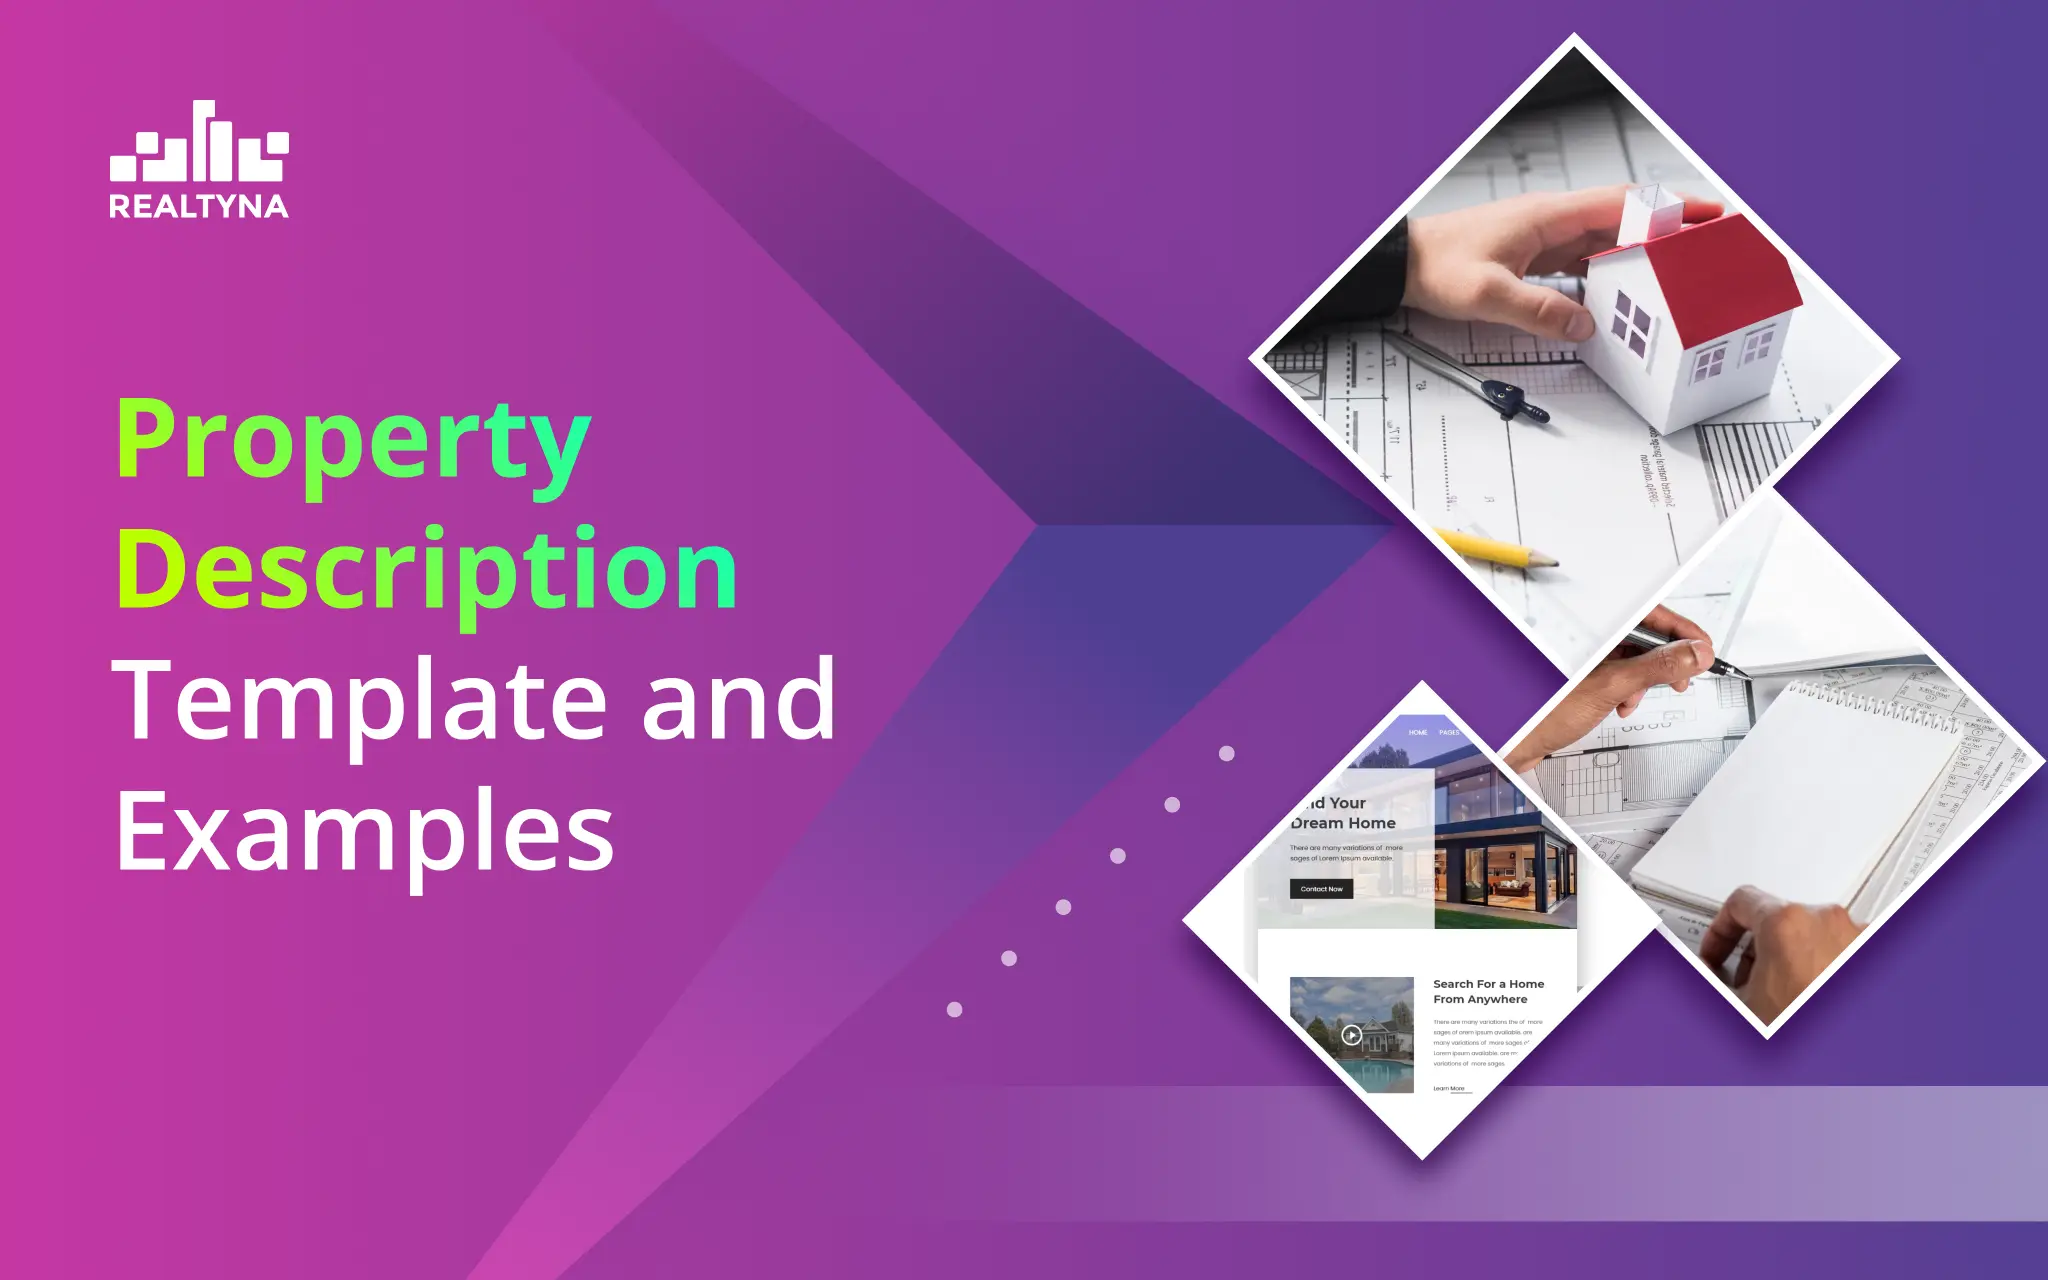 Property Description Template and Examples